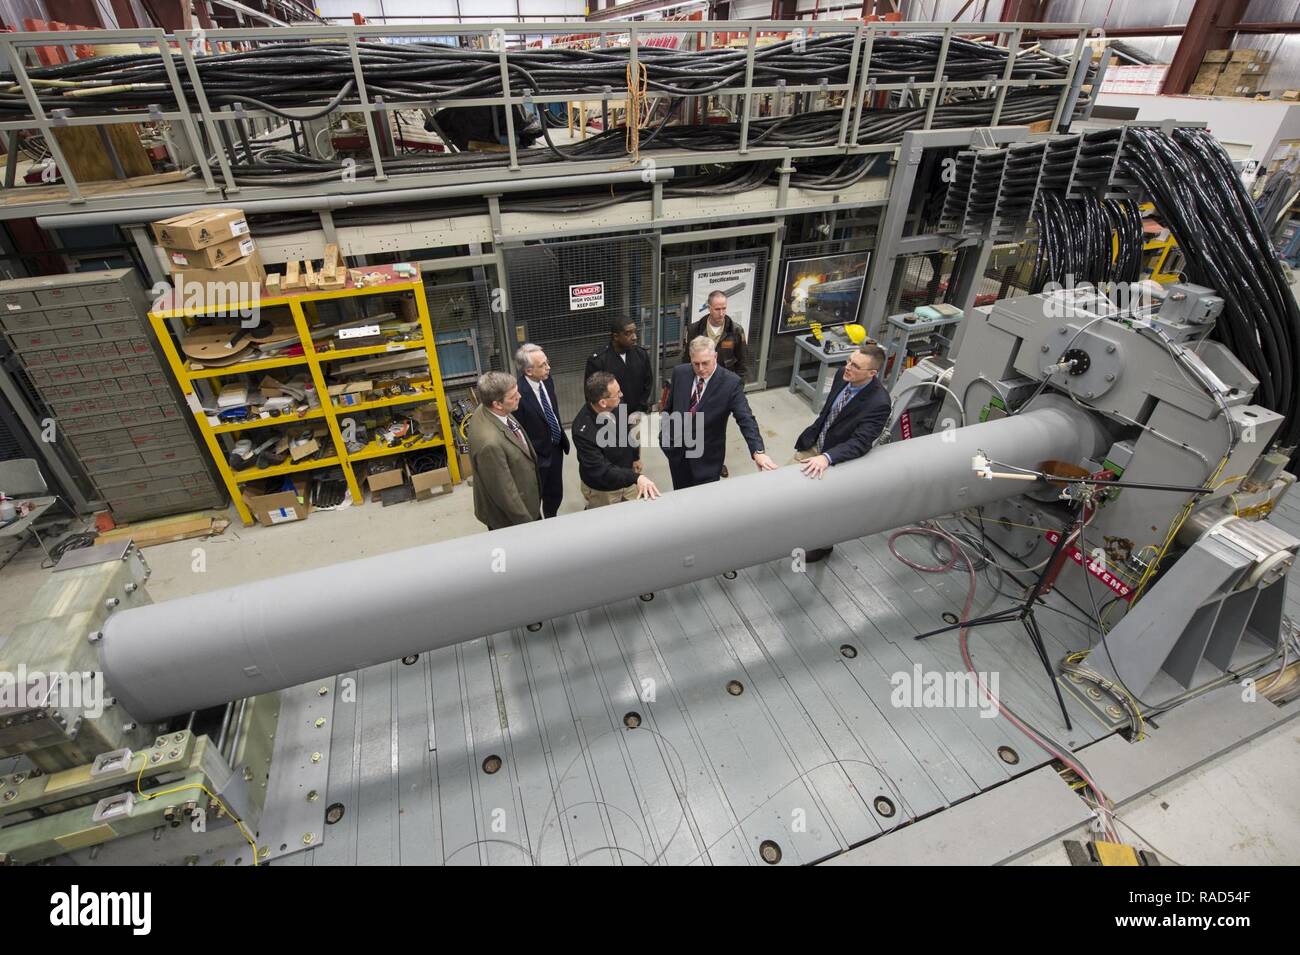 DAHLGREN (Jan. 12, 2017) Tom Boucher, second from right, program manager for the Electromagnetic Railgun at the Office of Naval Research (ONR), talks to Rear Adm. David Hahn, chief of naval research, during a visit to the railgun facility located at Naval Surface Warfare Center, Dahlgren Division. The EM Railgun launcher is a long-range weapon that fires projectiles using electricity instead of chemical propellants. Magnetic fields created by high electrical currents accelerate a sliding metal conductor, or armature, between two rails to launch projectiles at 4,500 mph. Stock Photo